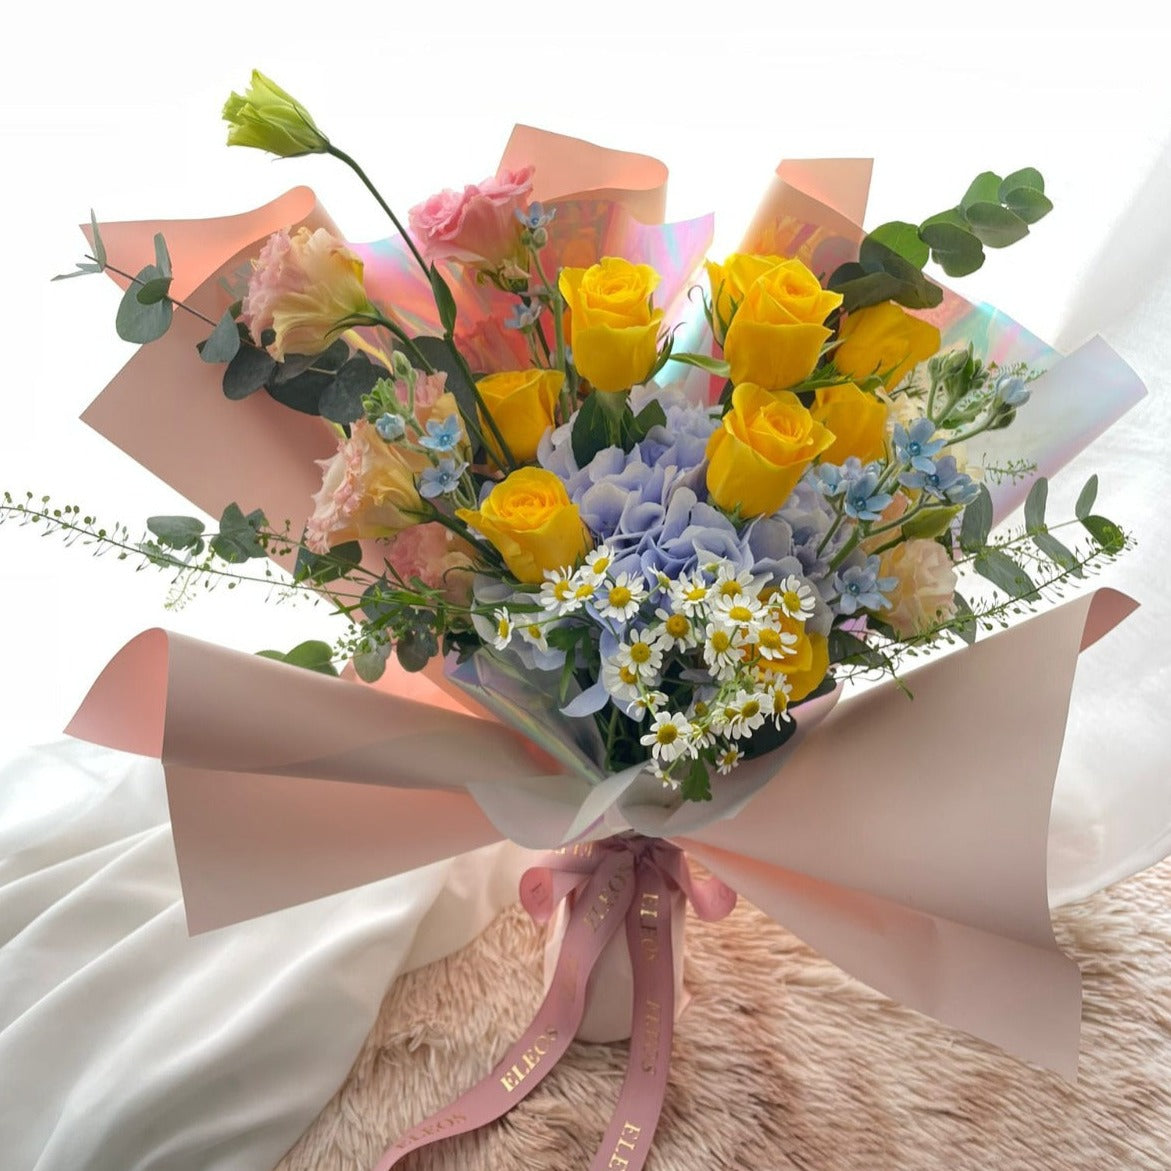 Affordable Cheap and Fresh Hydrangea, Roses, Eustoma in Bright Pastel Colors below $150 with Free Delivery in Singapore